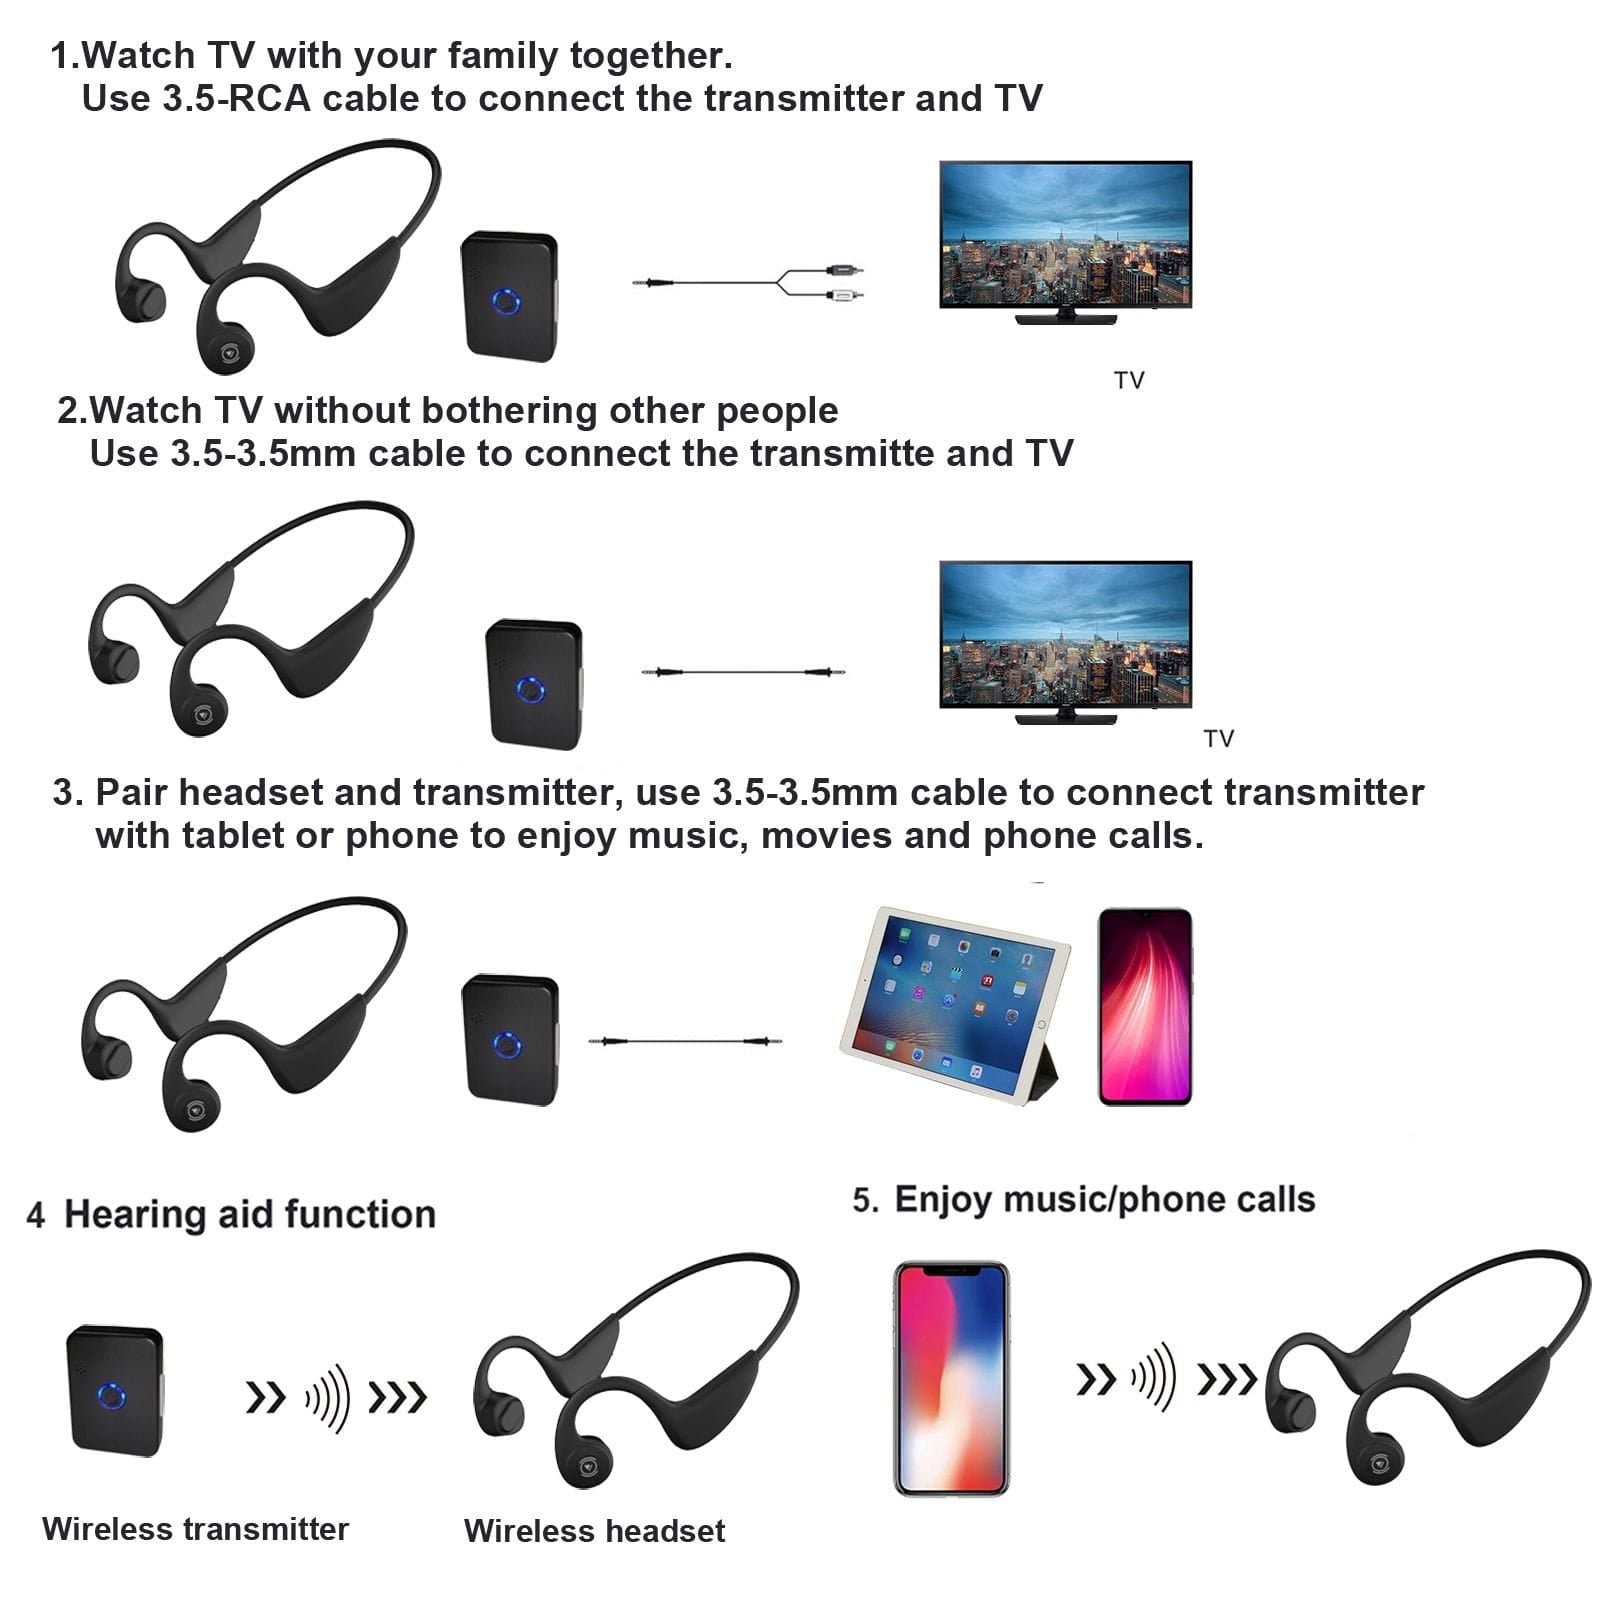 eEAR-BC-BT-Tx eEAR Bone Conduction Hearing Aids with Sound Transmitter. YES, IT'S HEARING AIDS, 2 in ONE, Bone Conduction Bluetooth headphones, military grade technology, and Bone Conduction Hearing Aids.